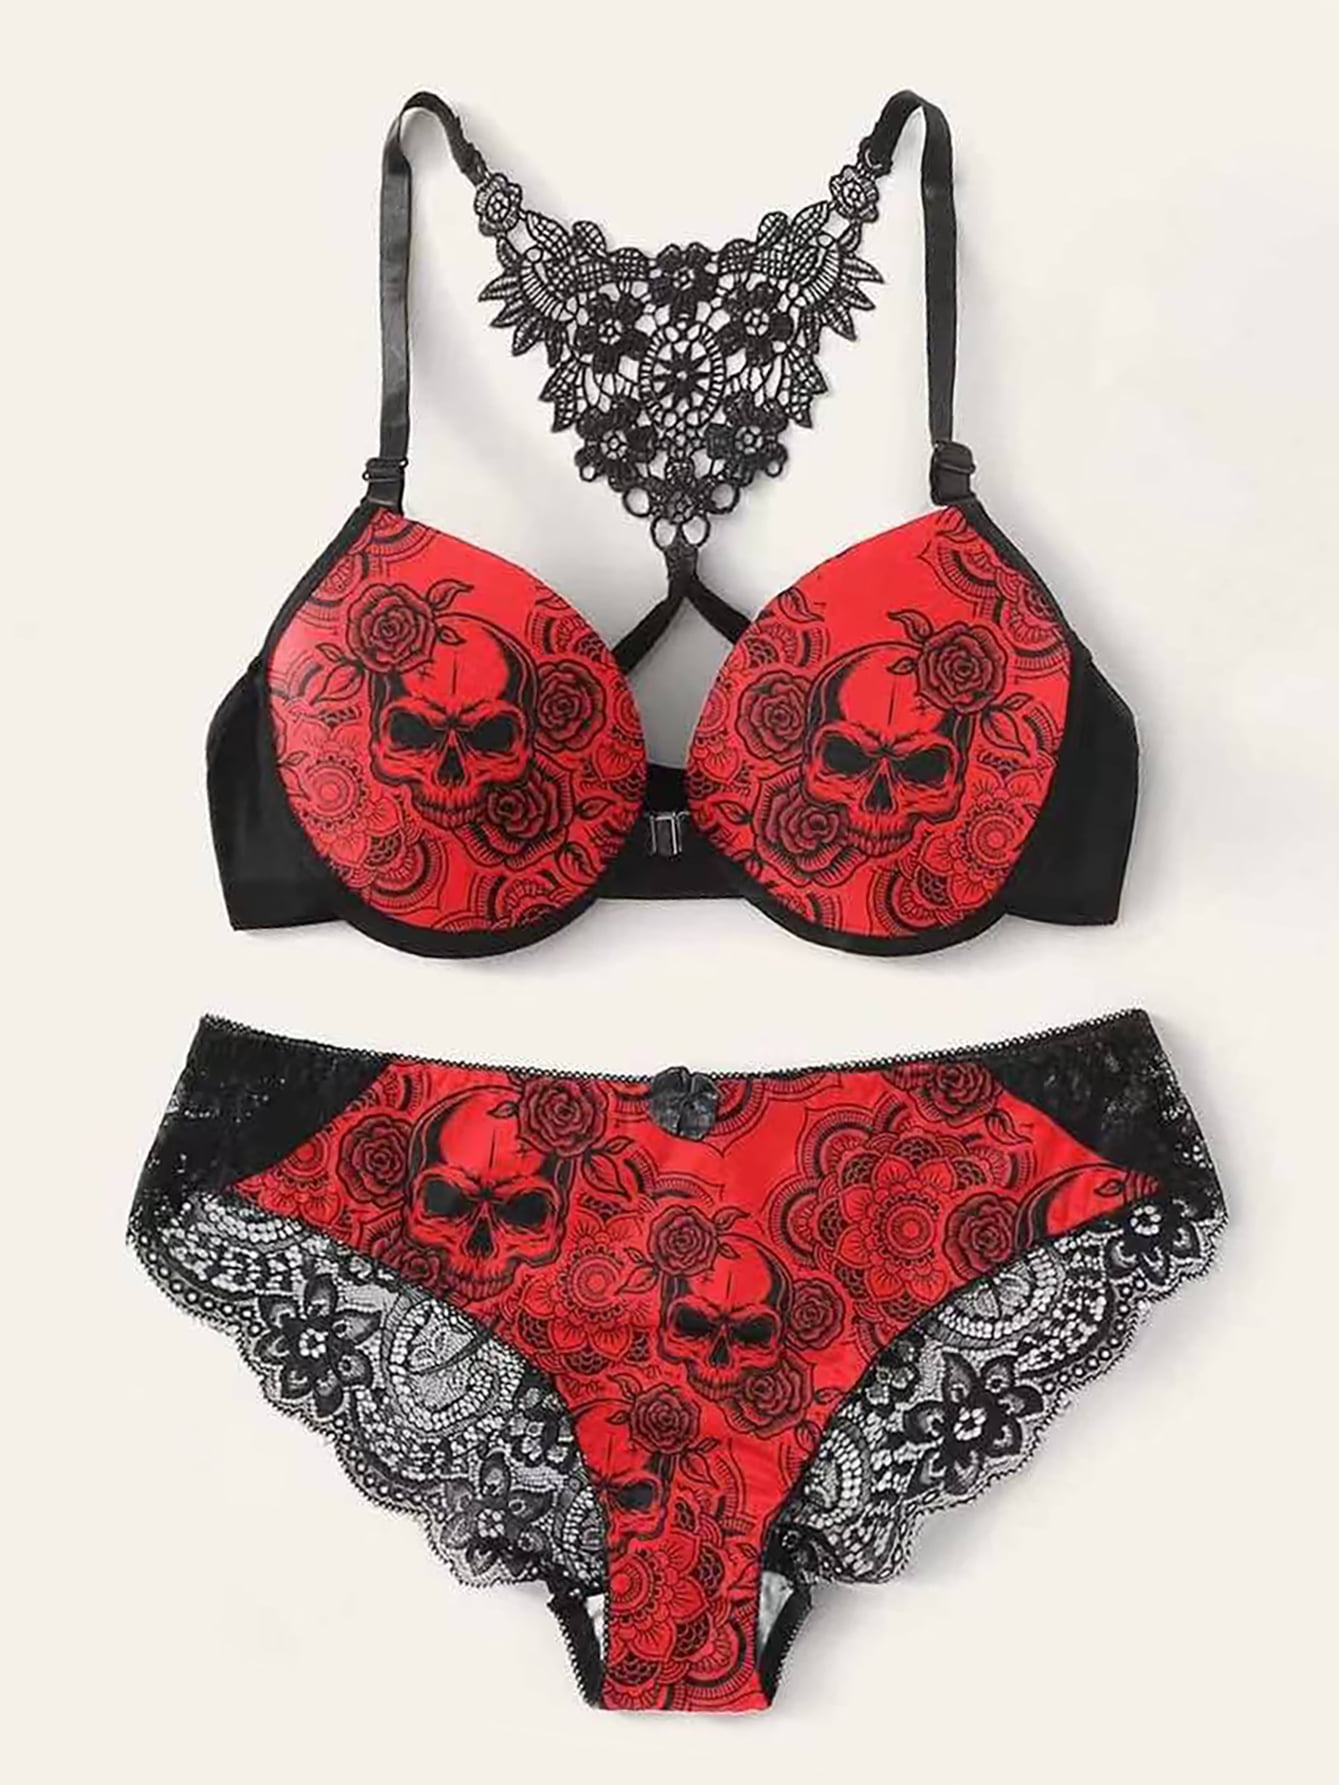 UIONEN Women's 2 Piece Sexy Lace Strap Bra and Panty Lingerie Set Red Skull  Size M 